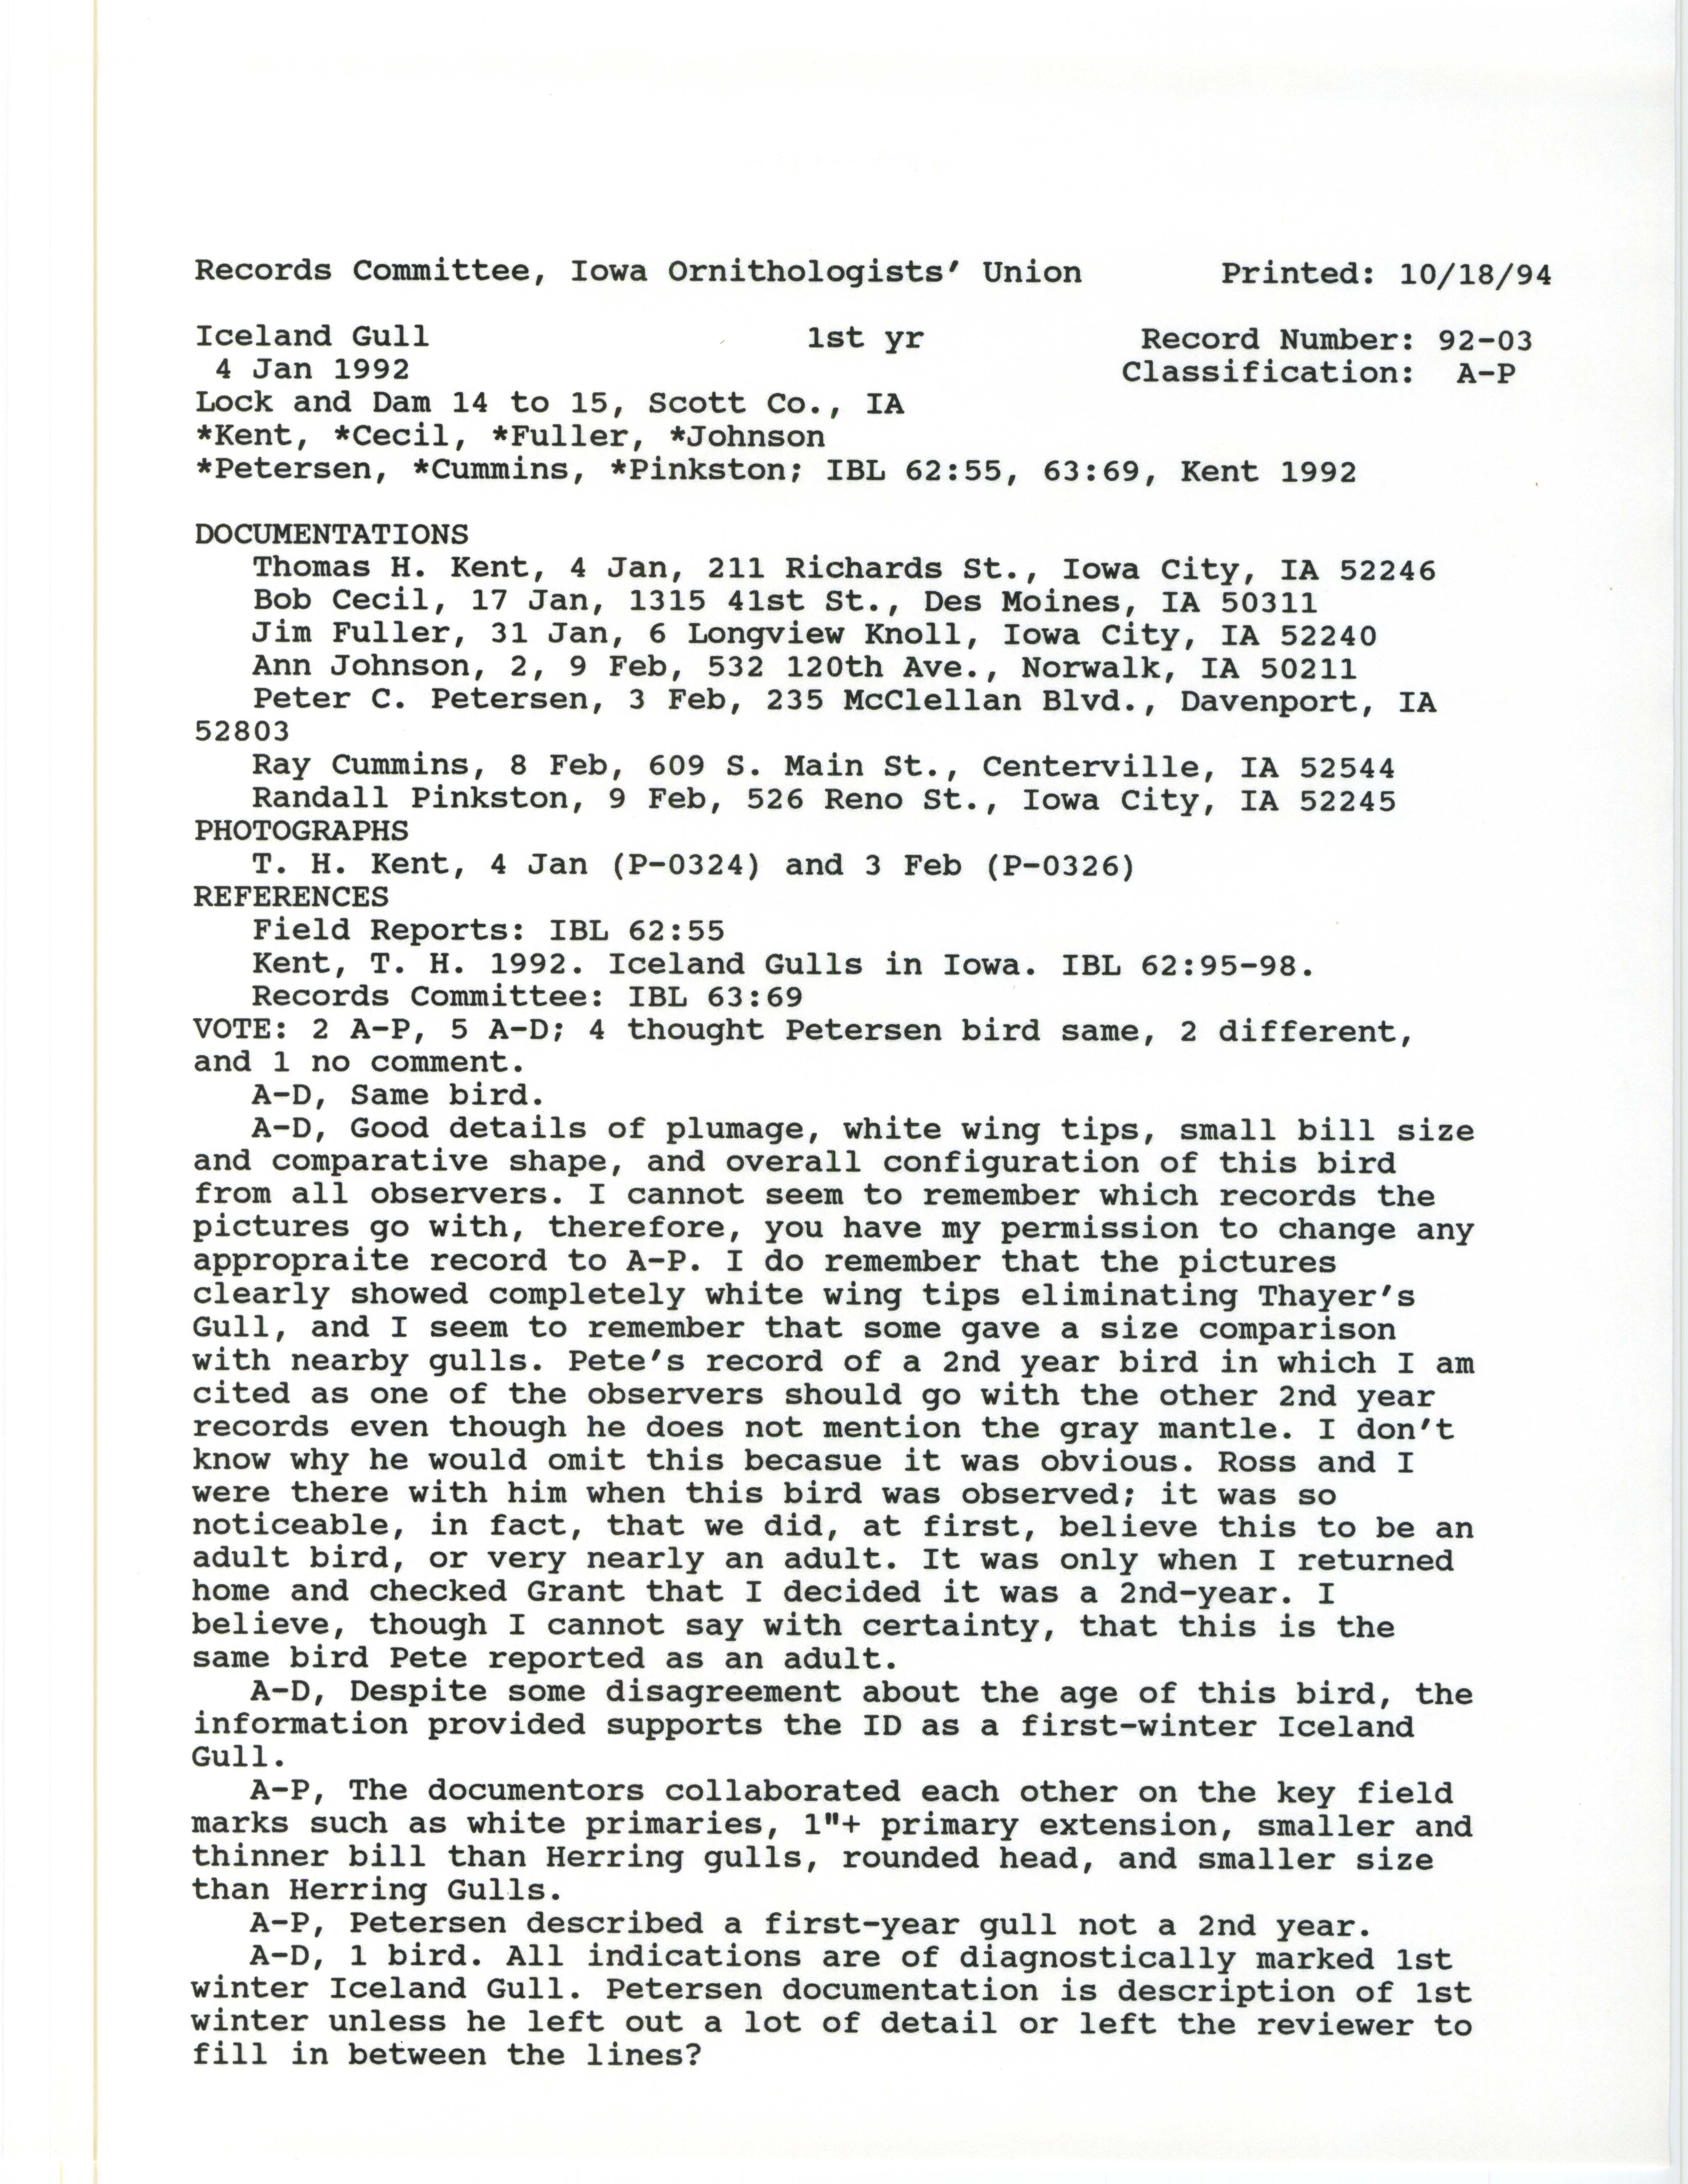 Records Committee review for rare bird sighting of Iceland Gull at Lock and Dam 14, 1992